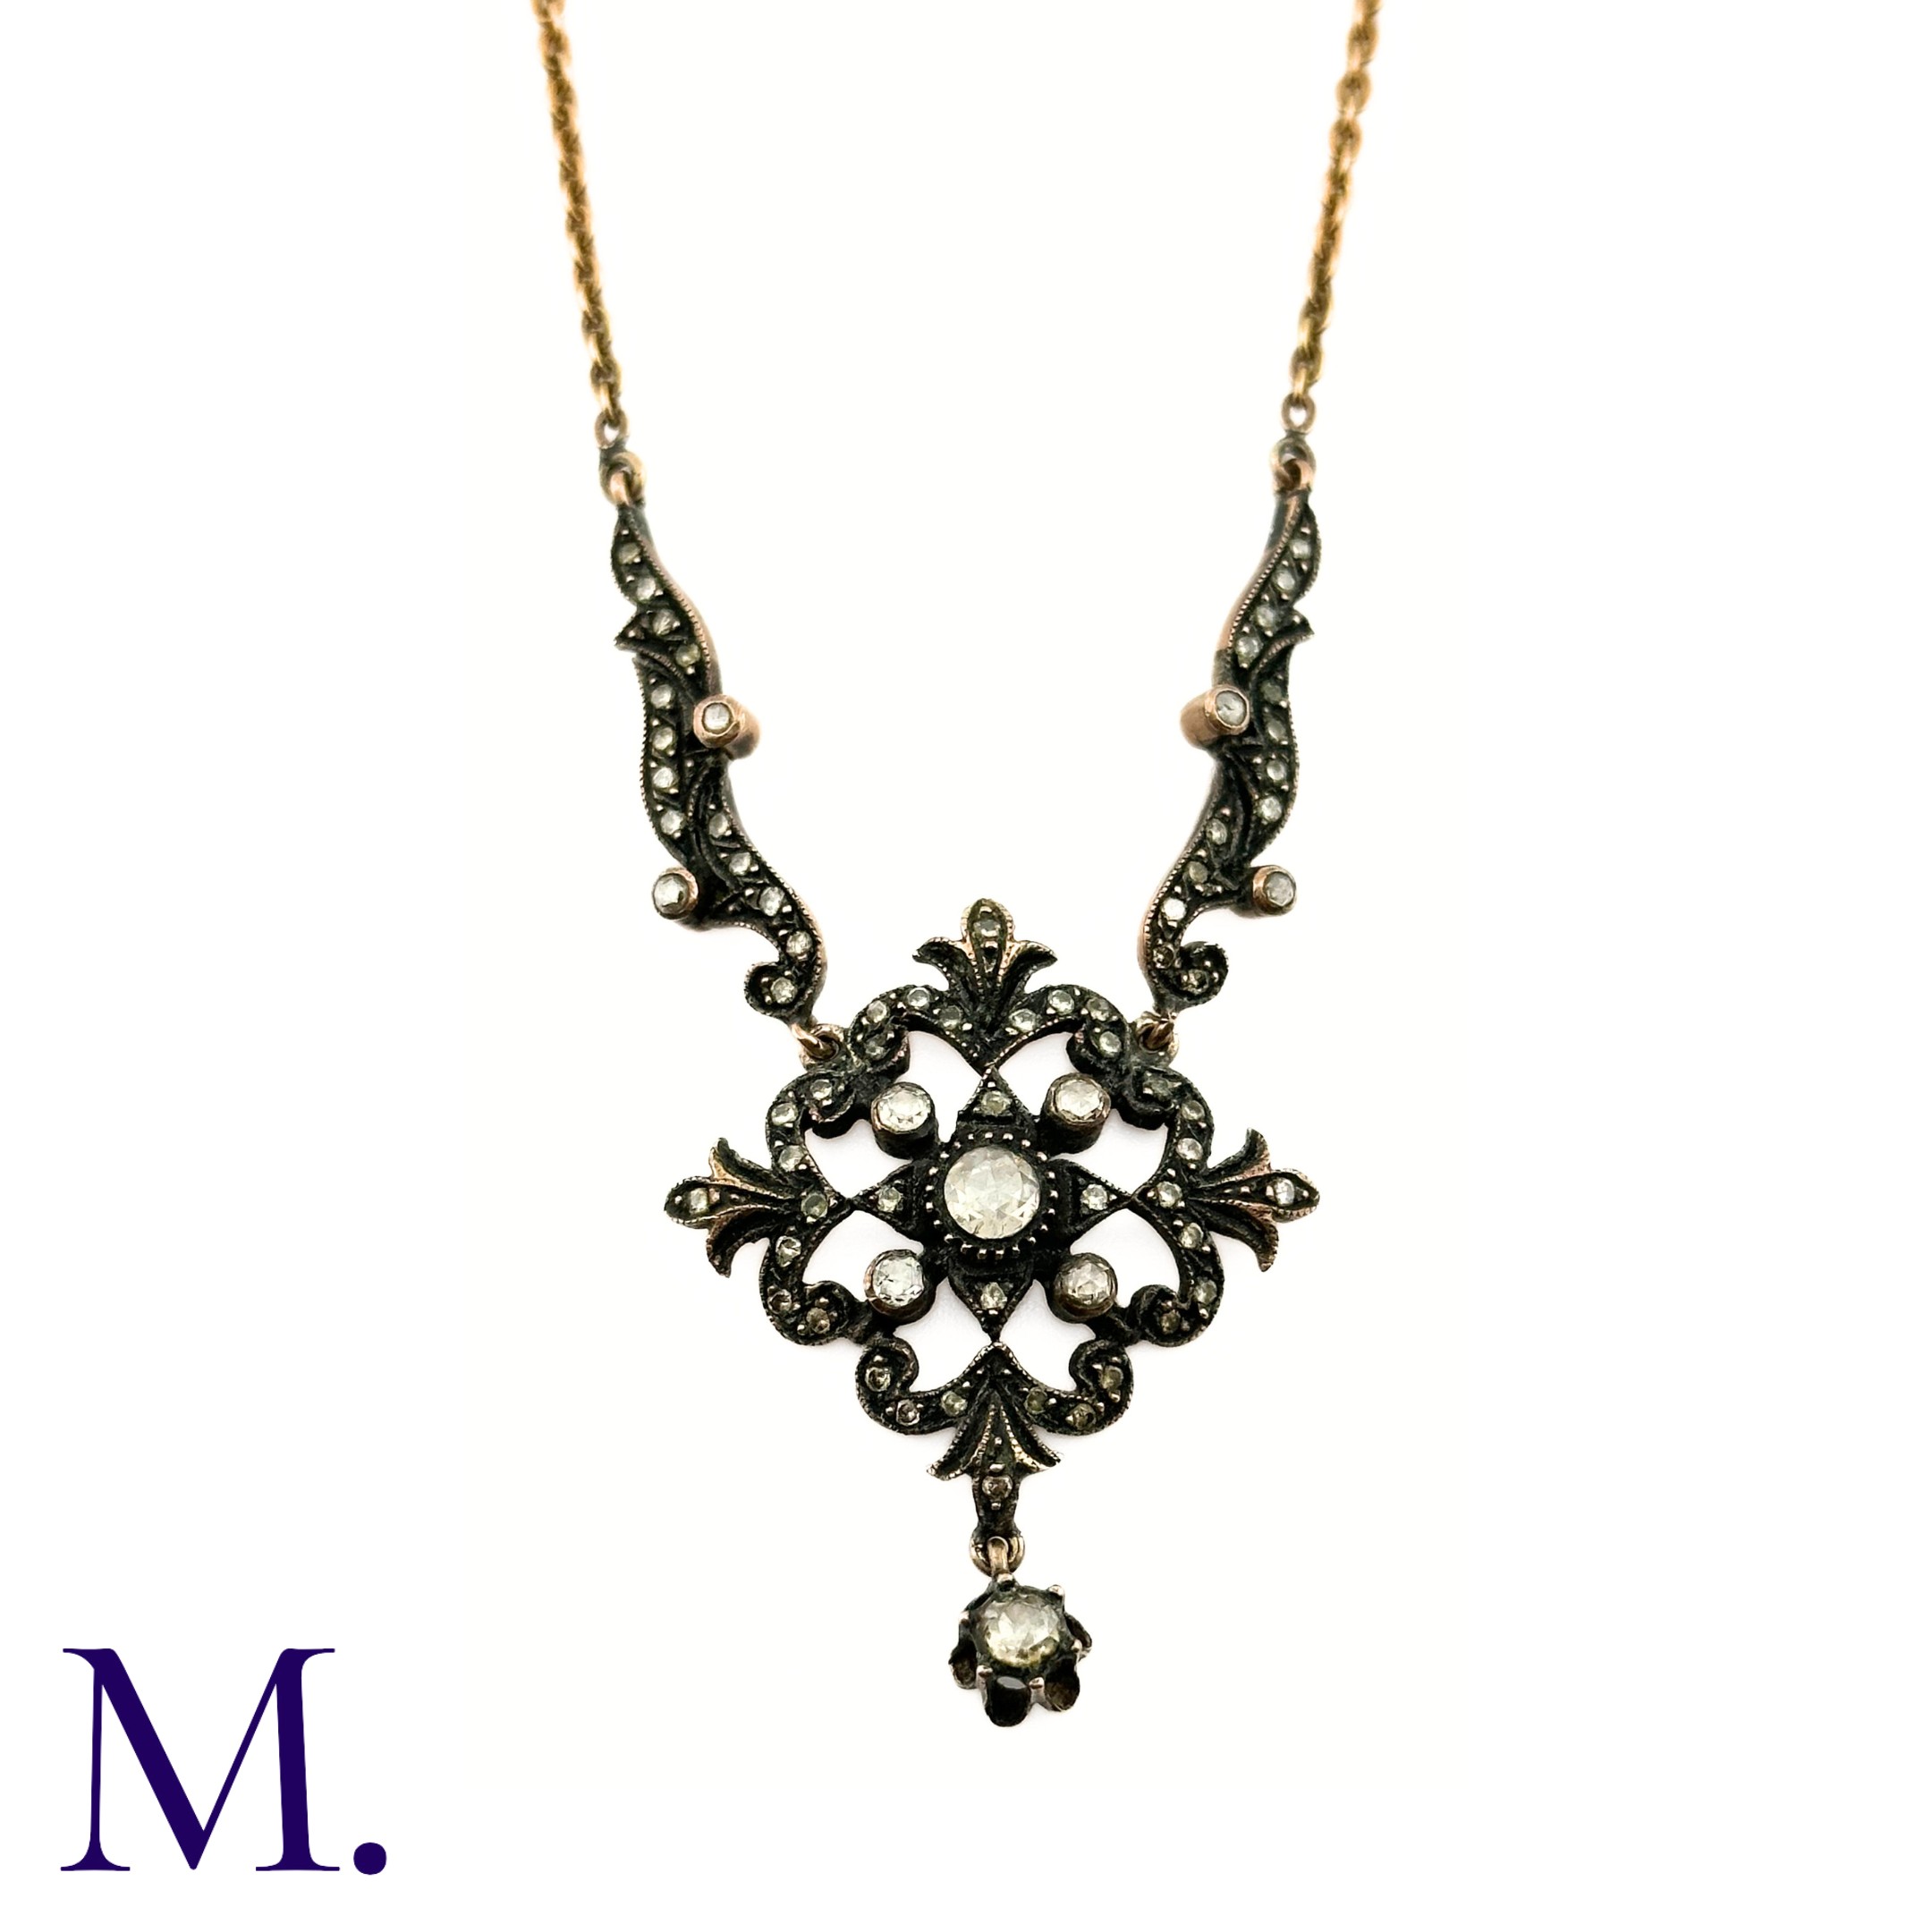 A Rose Diamond Necklace The rose diamond pendant hangs from a 48cm later 14ct gold chain. The - Image 4 of 4